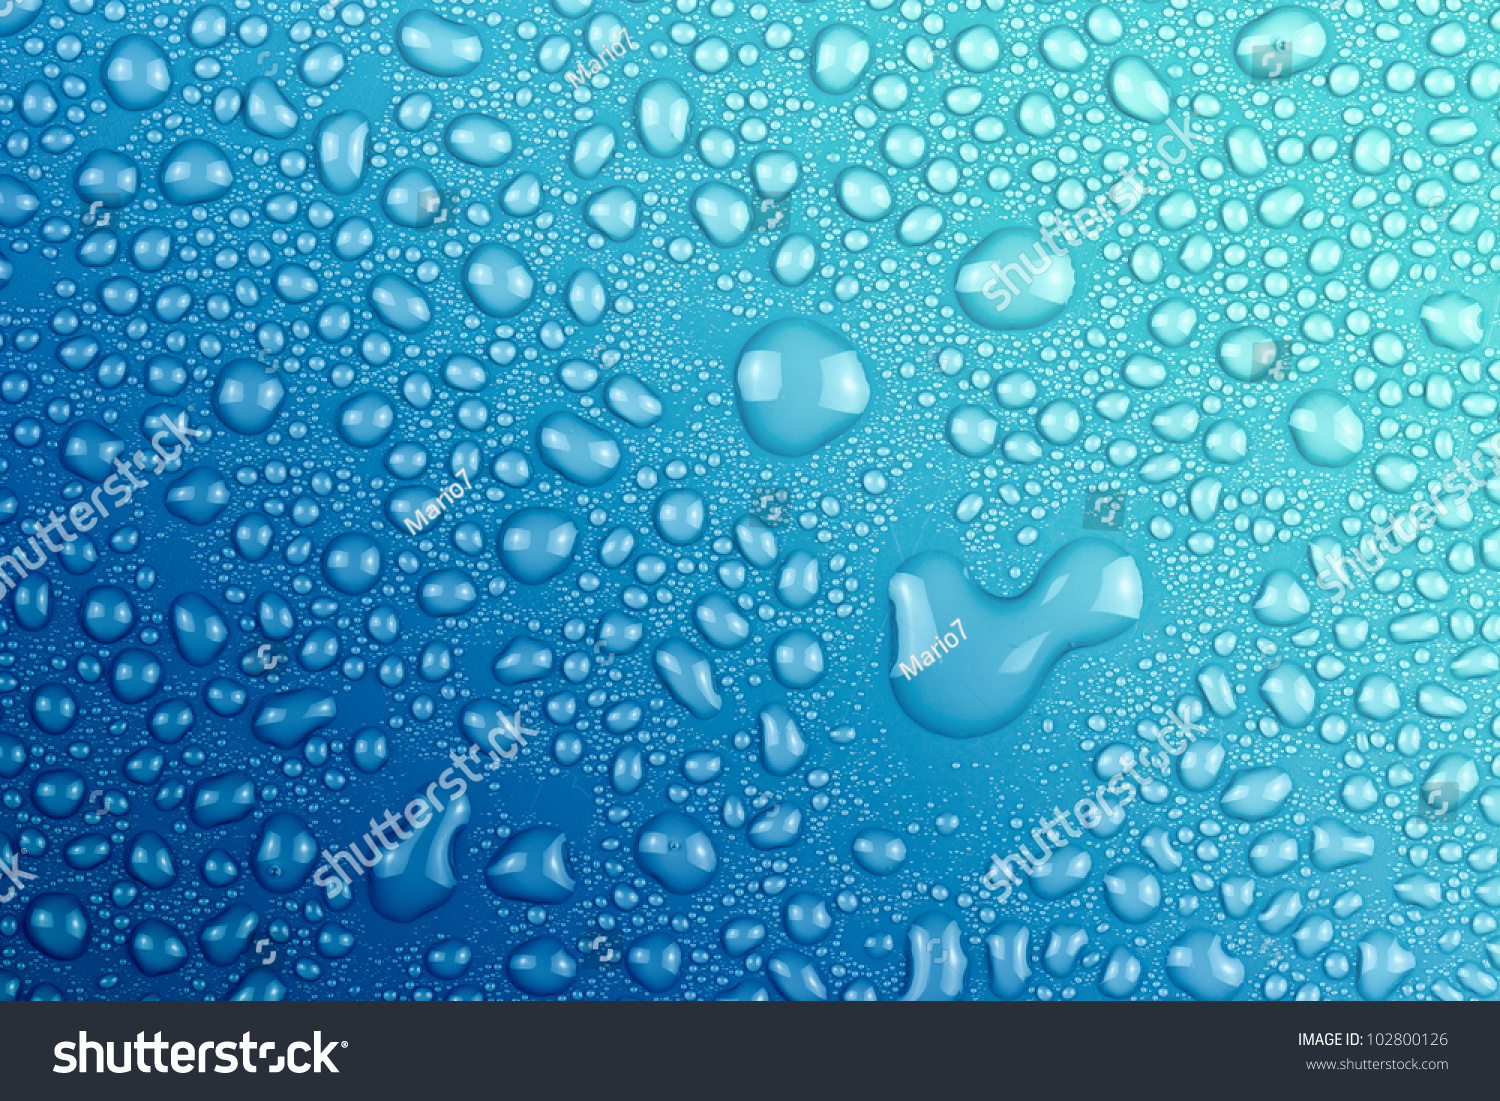 Water Drops Background Stock Photo 102800126   Shutterstock